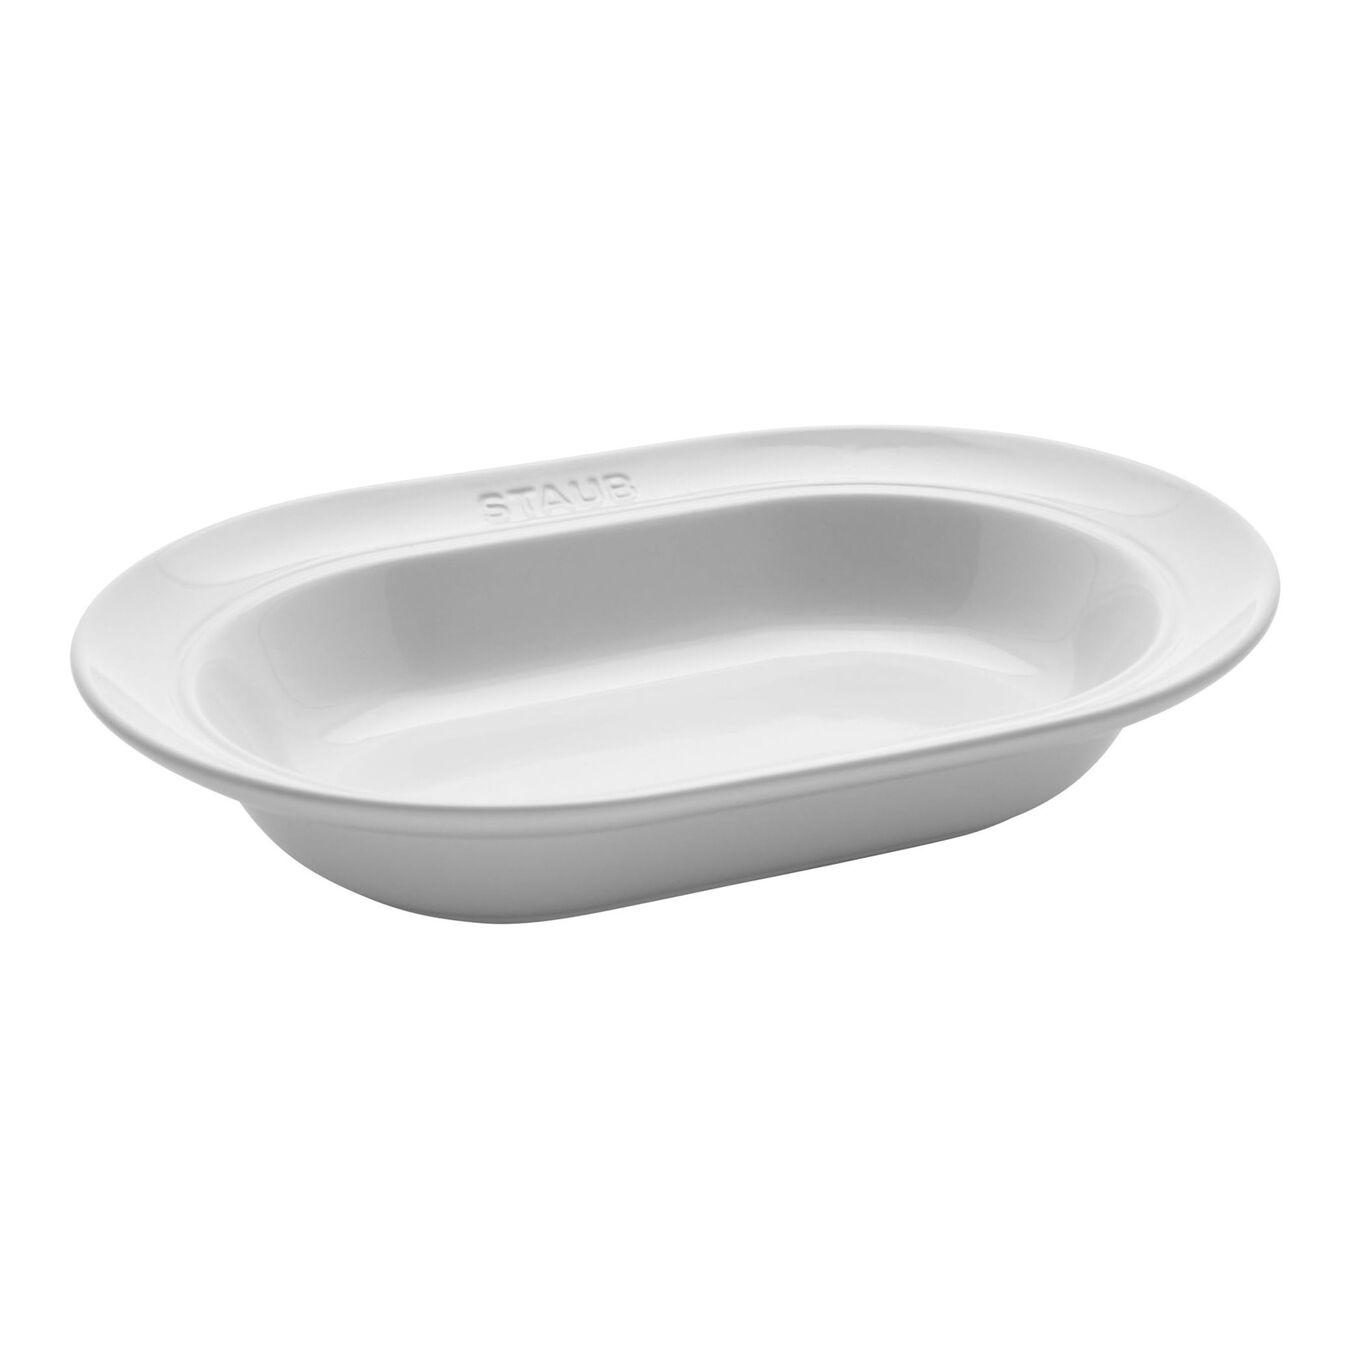 10-inch, oval serving dish, white,,large 1